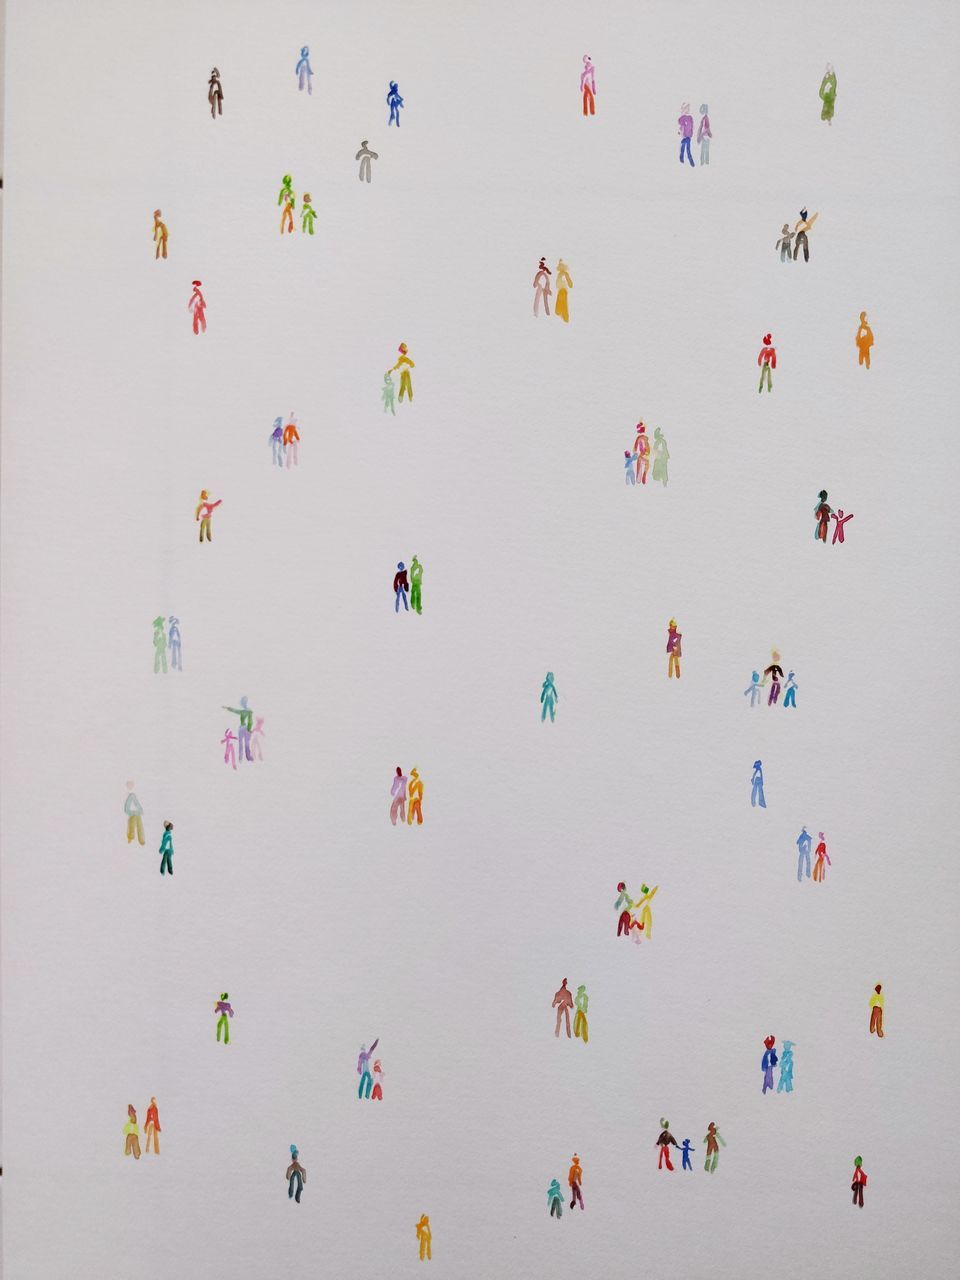 multi colored, line, large group of objects, celebration, childhood, mid-air, crowd, large group of people, event, fun